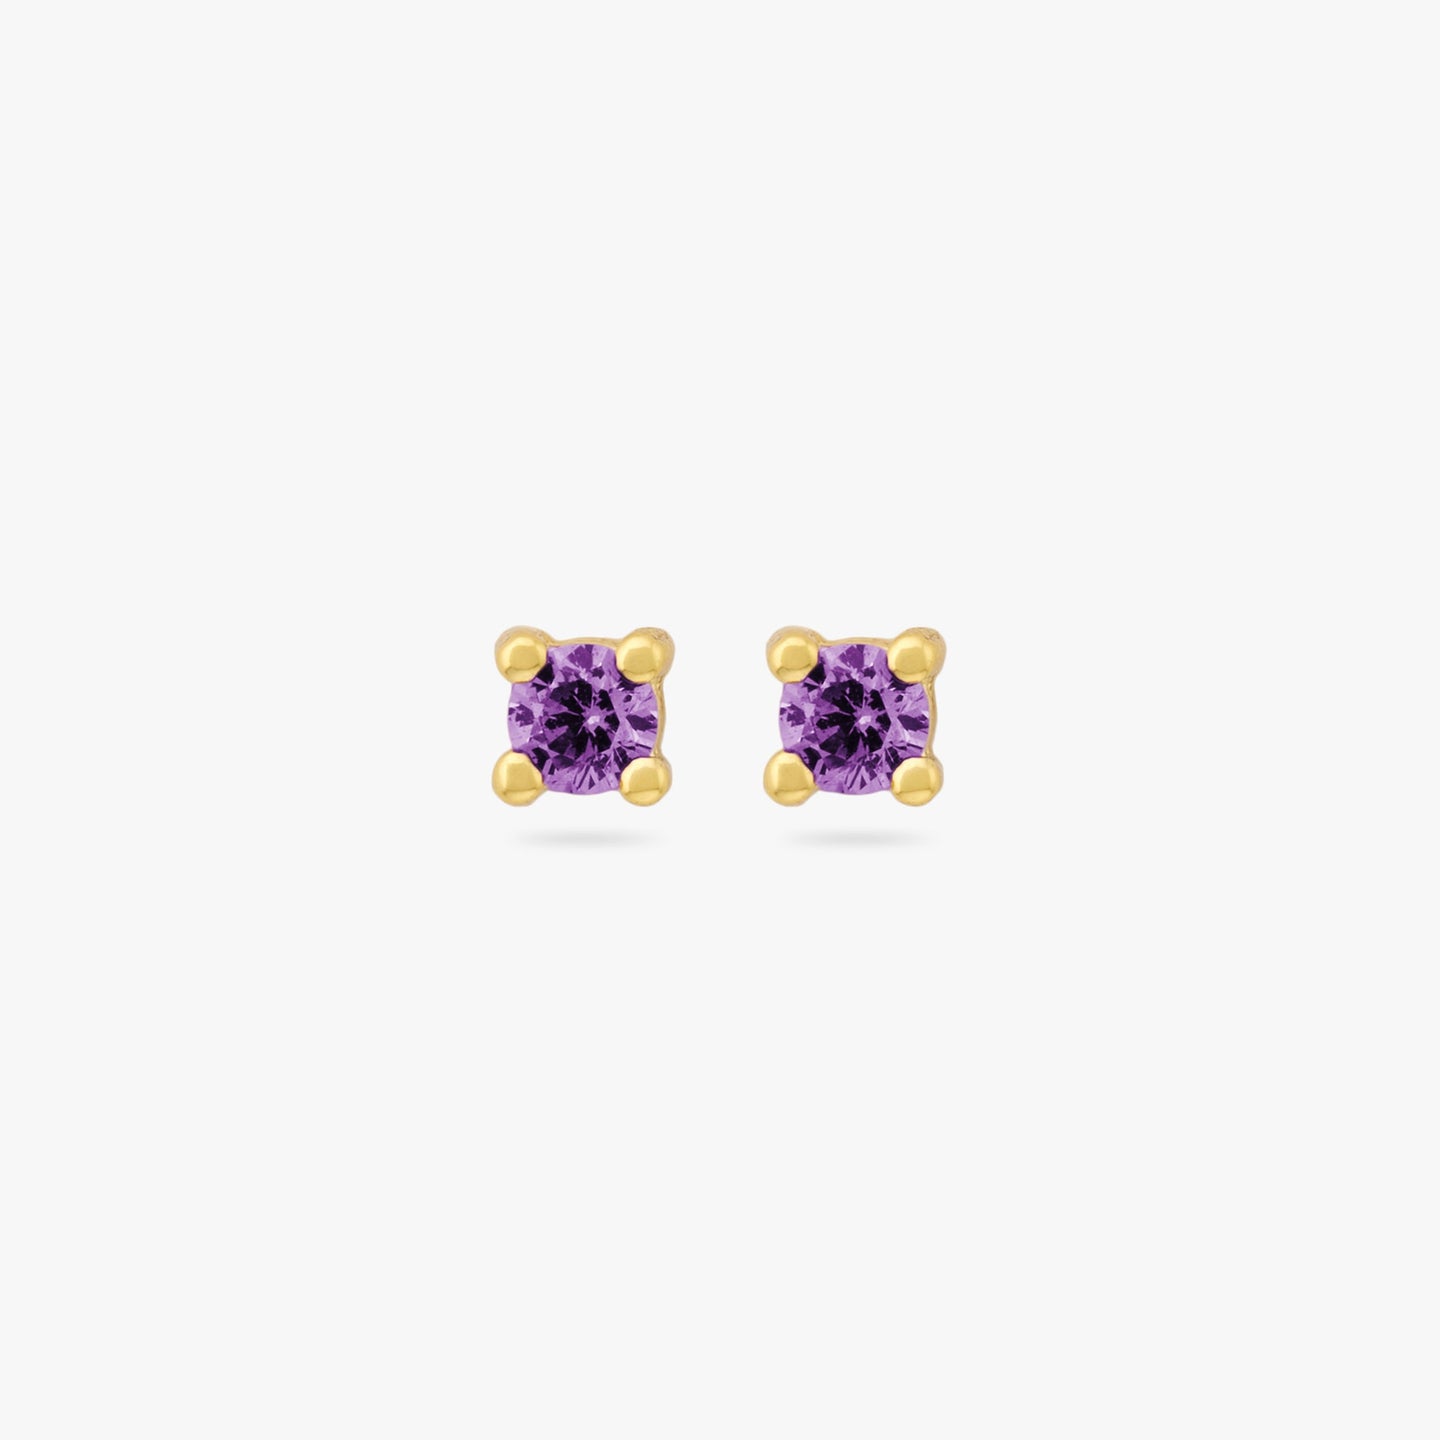 A pair of mini gold studs with purple cz gems color:null|gold/purple